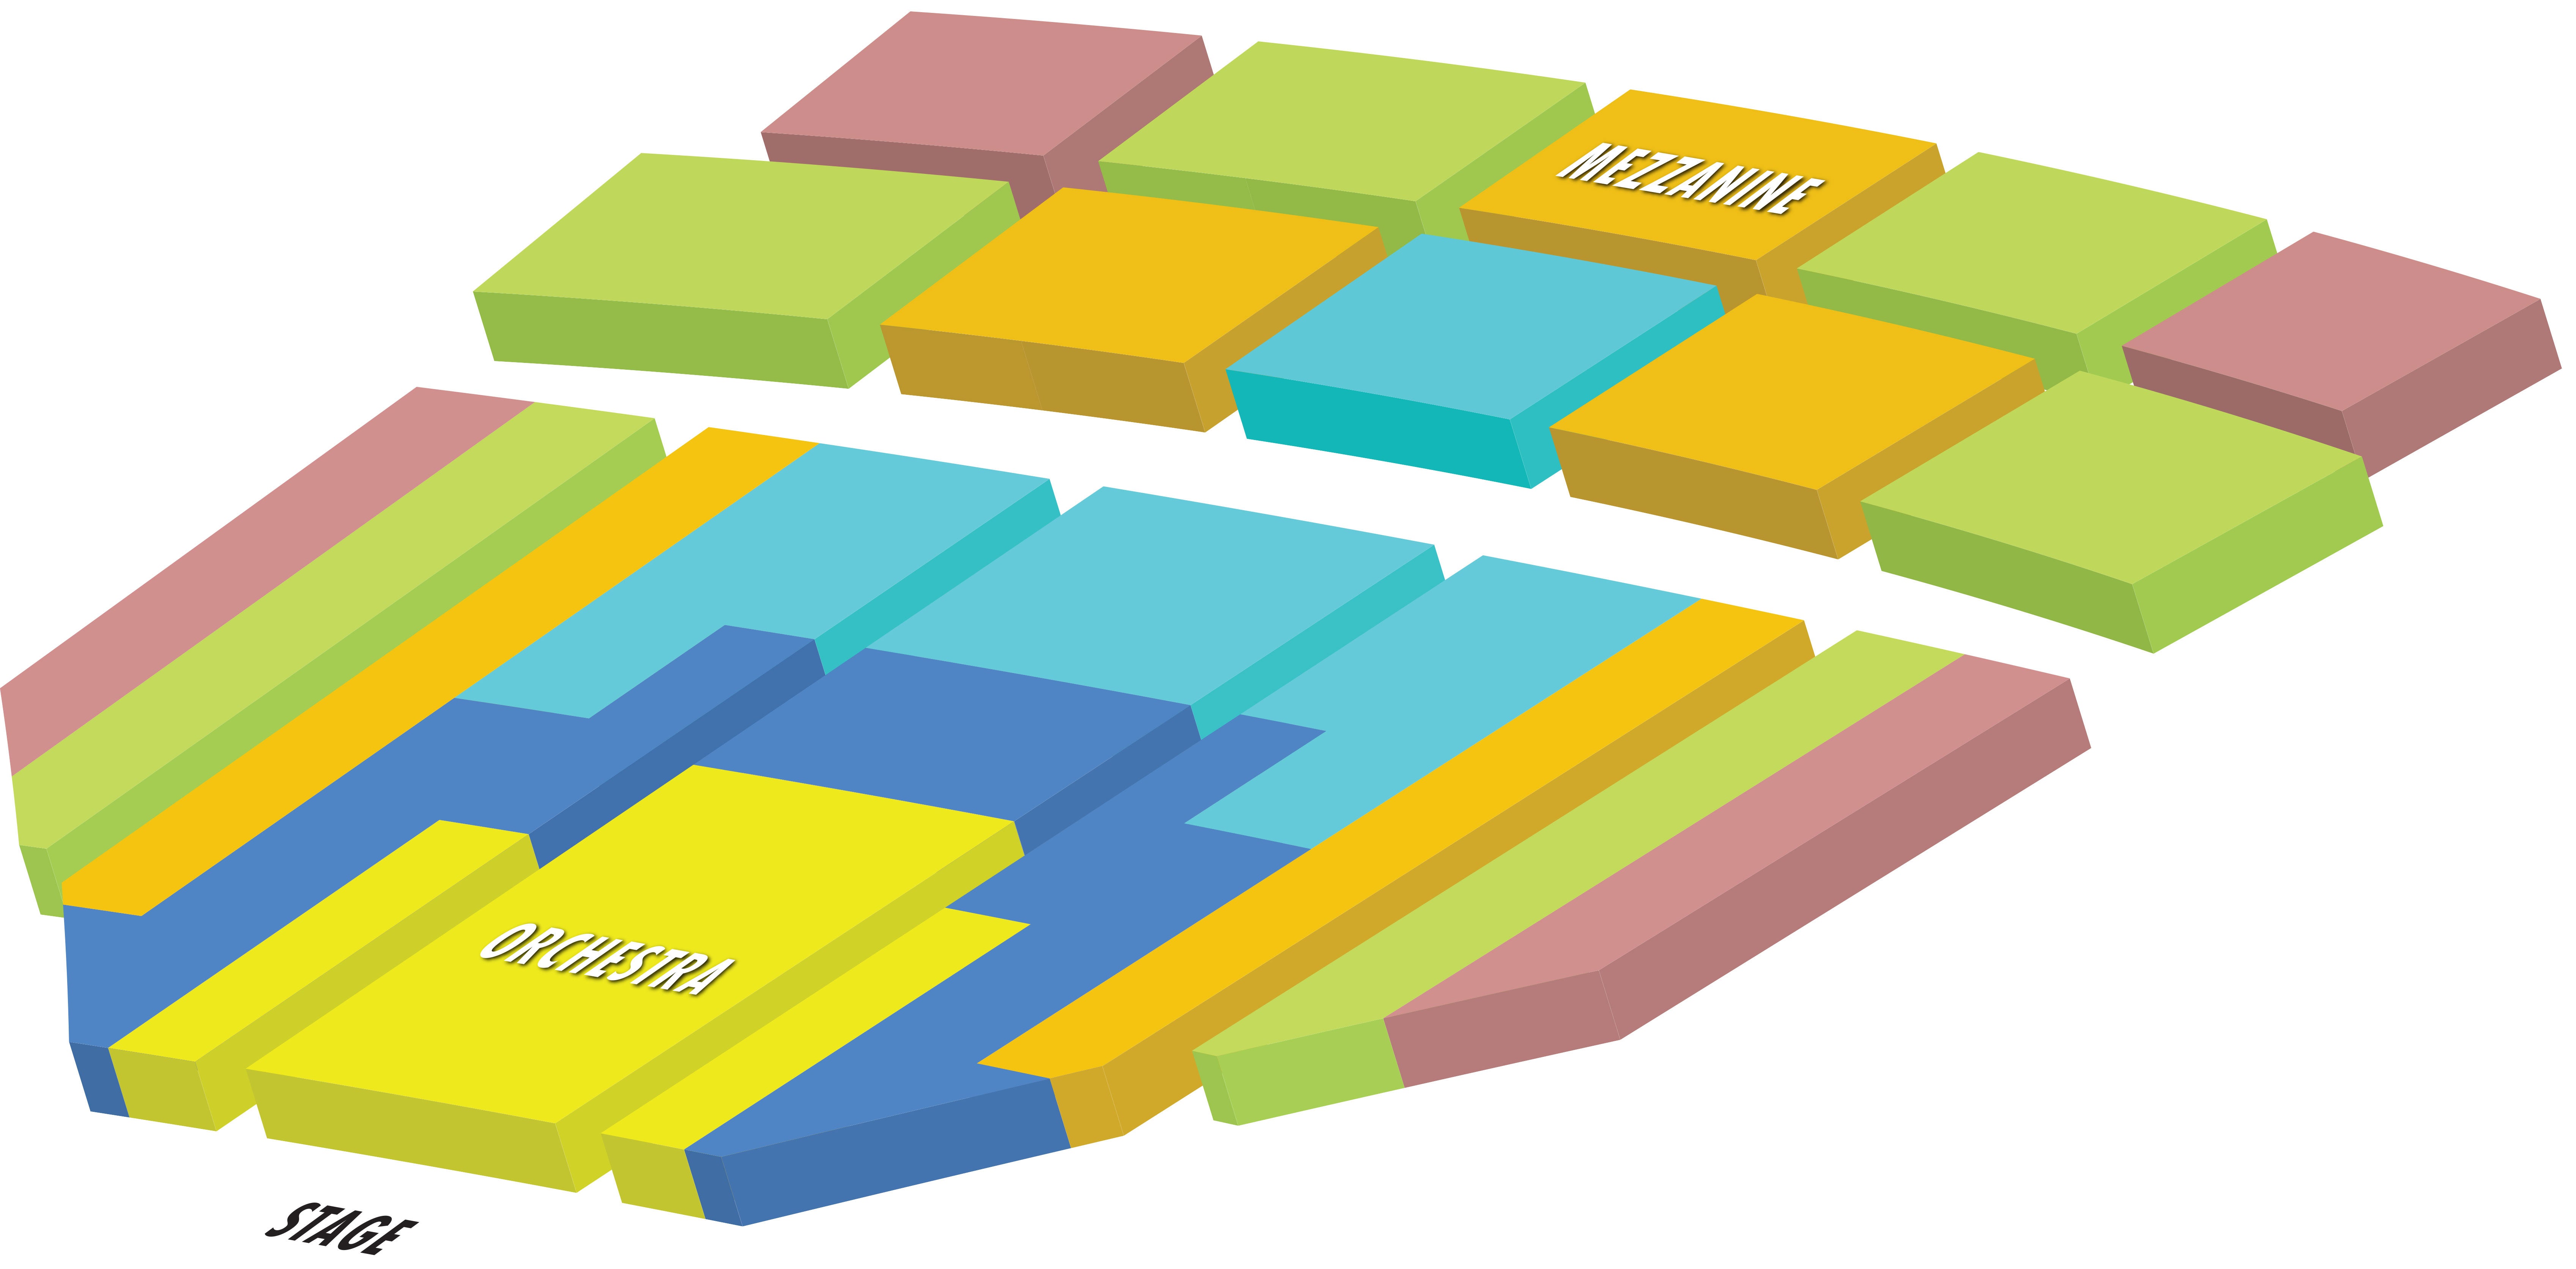 Pantages Theatre Seating Chart: The stage is located in the lower left corner. The orchestra section is located on the ground floor followed by the mezzanine, separated from the orchestra to denote that it is a floor above. The orchestra and mezzanine sections are broken into colored segments based on the prices of season tickets. Price level A is yellow, price level B is dark blue, price level c is light blue, price level D is orange, price level E is green and price level F is pink. The orchestra contains seats in all price levels while the mezzanine contains seats in price ranges C thru F.